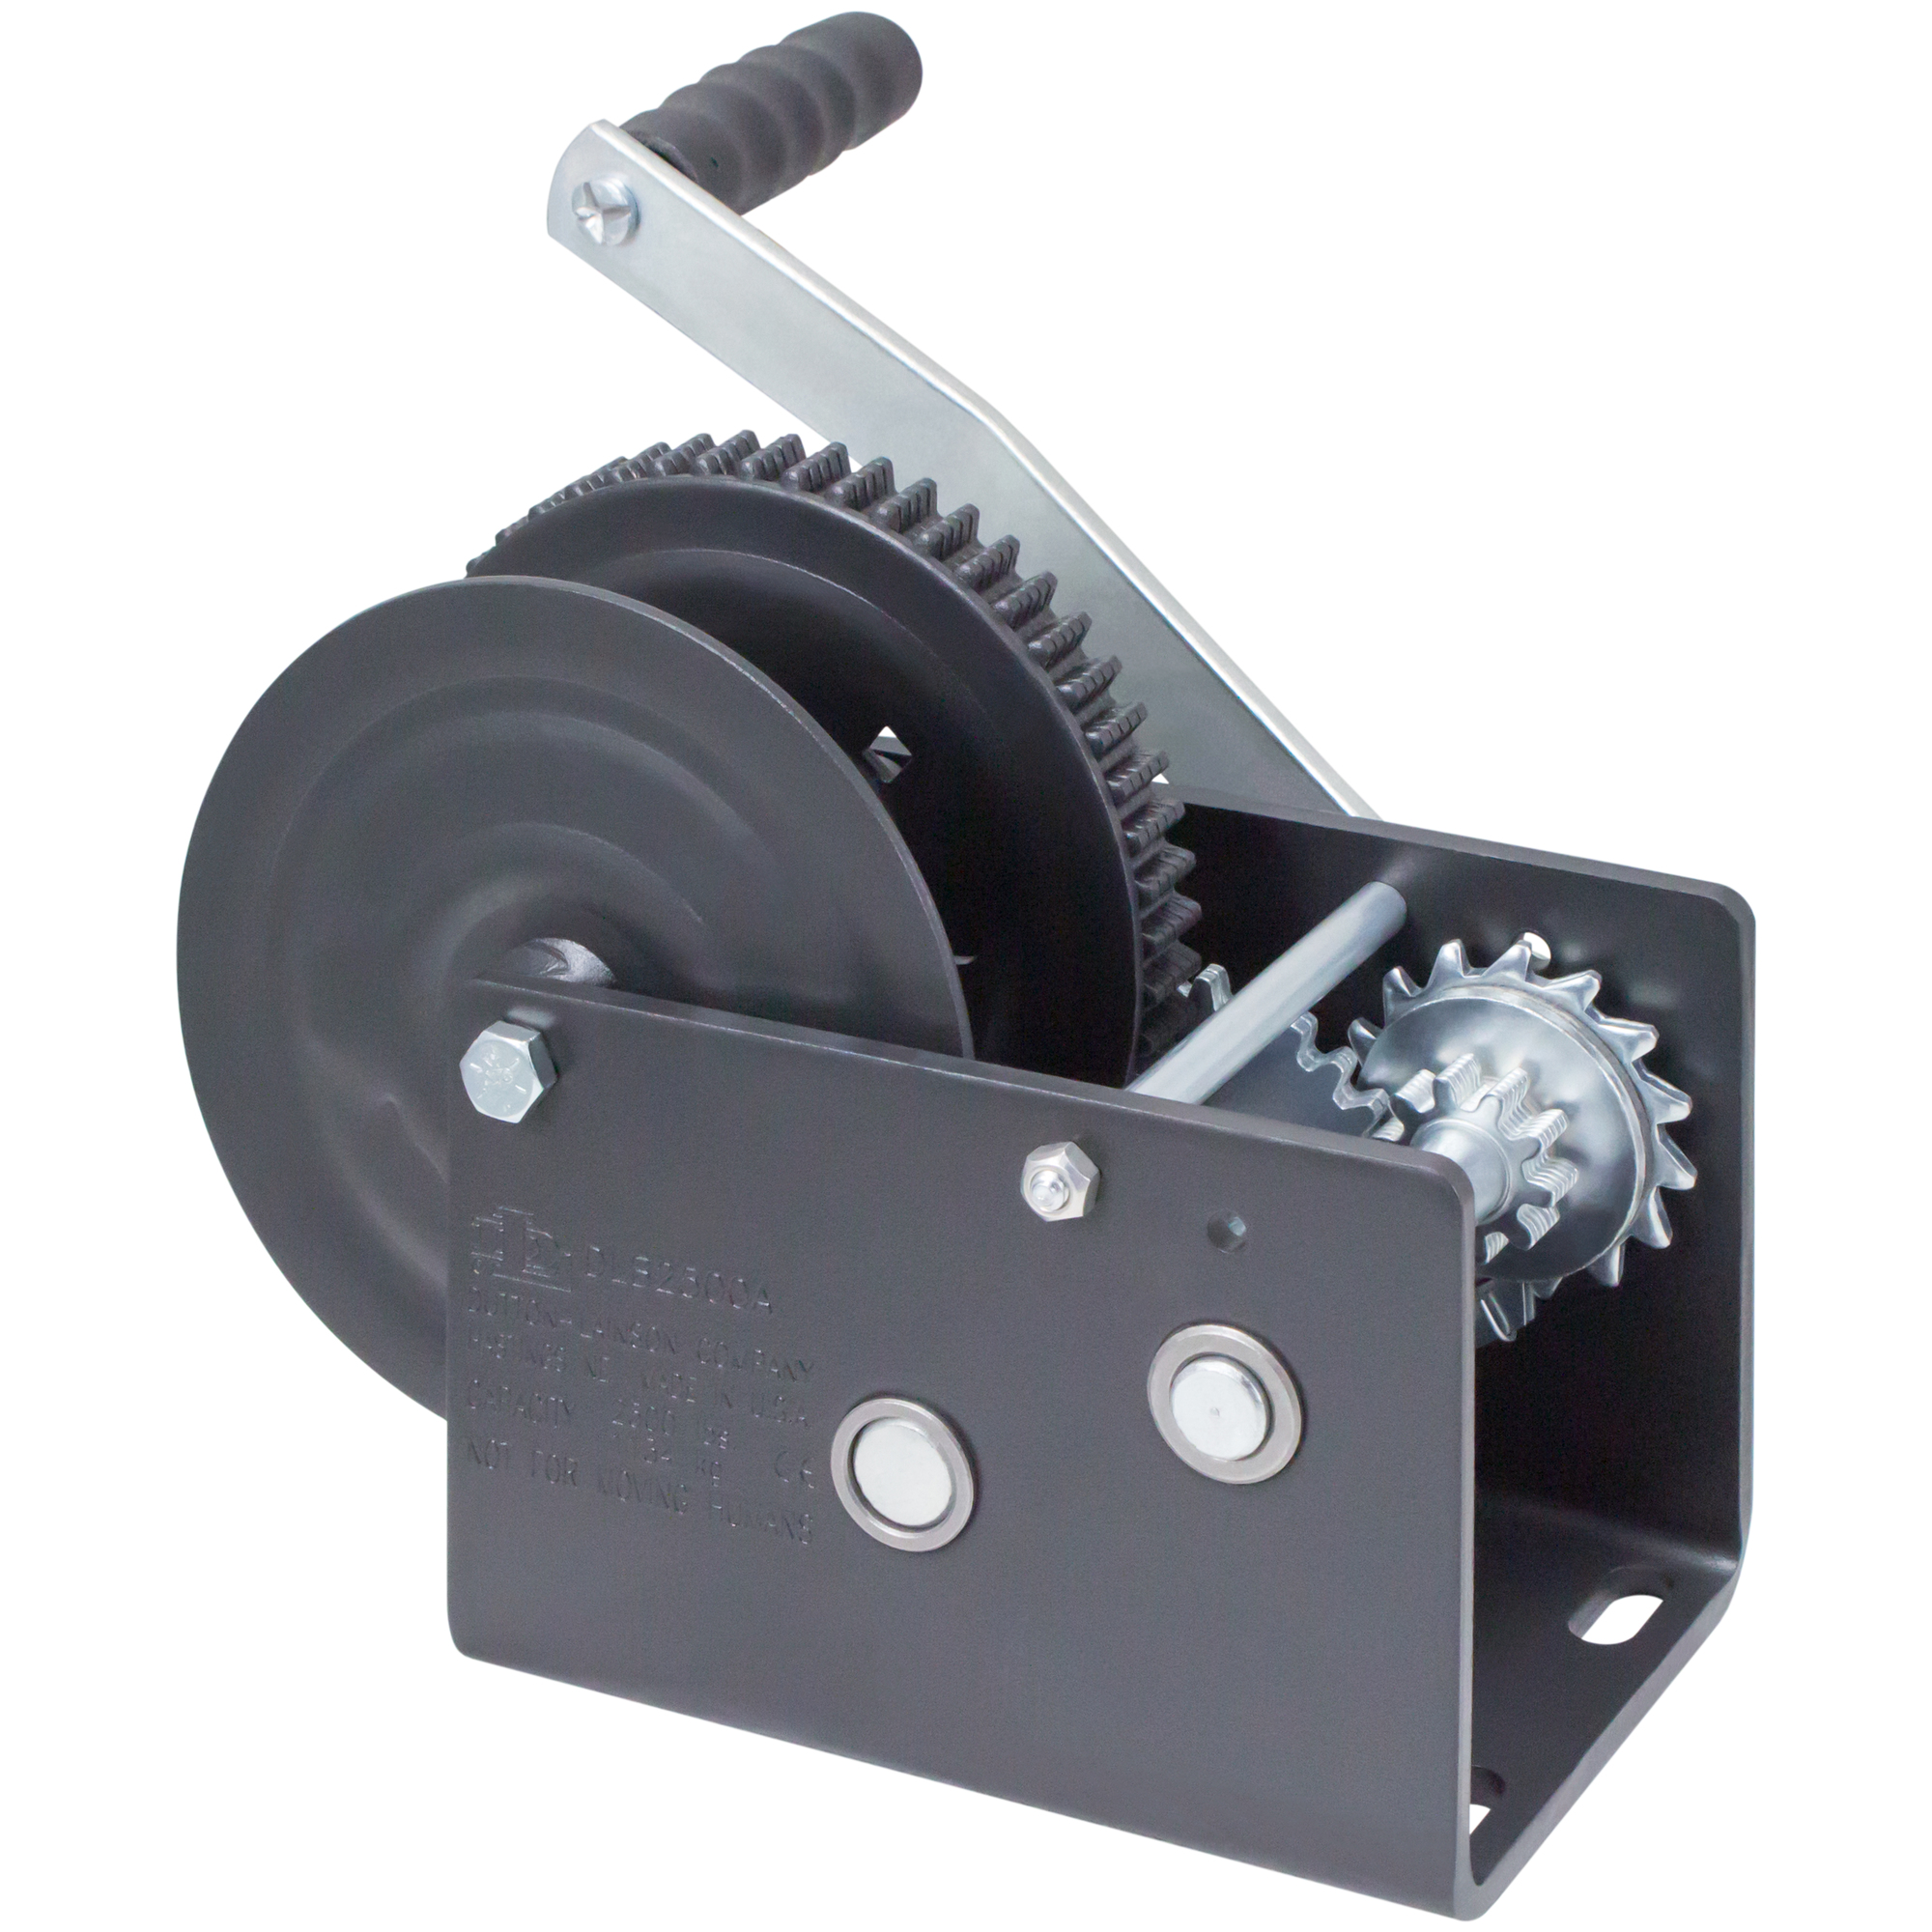 Dutton-Lainson Single Speed Hand Winch with Automatic Brake, 2500-Lb. Capacity, Model DLB2500A